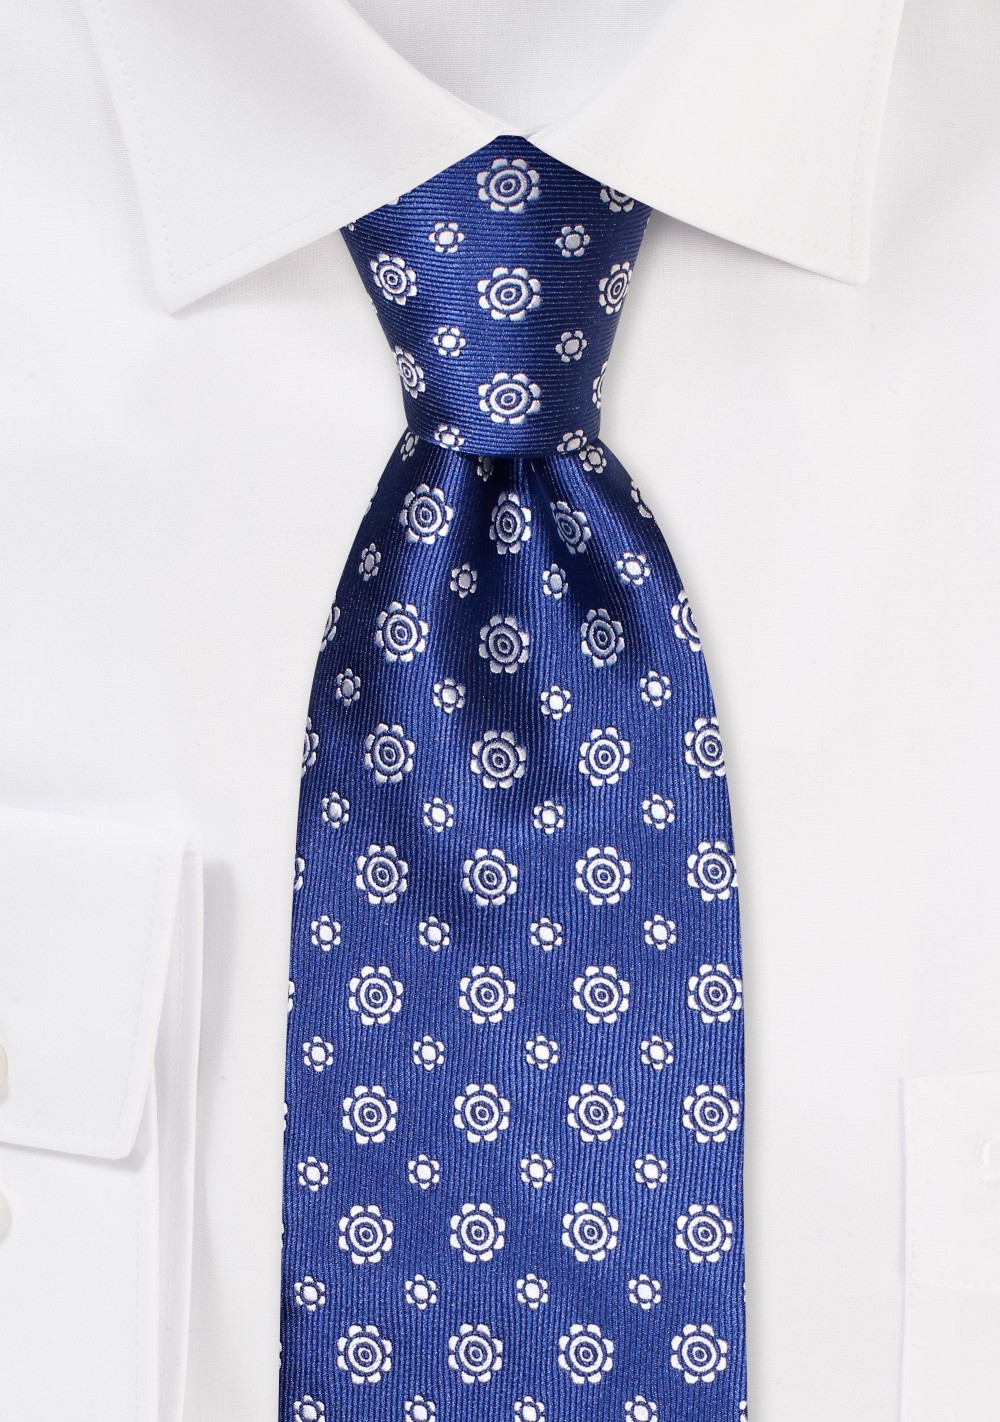 Royal Blue Tie with Silver